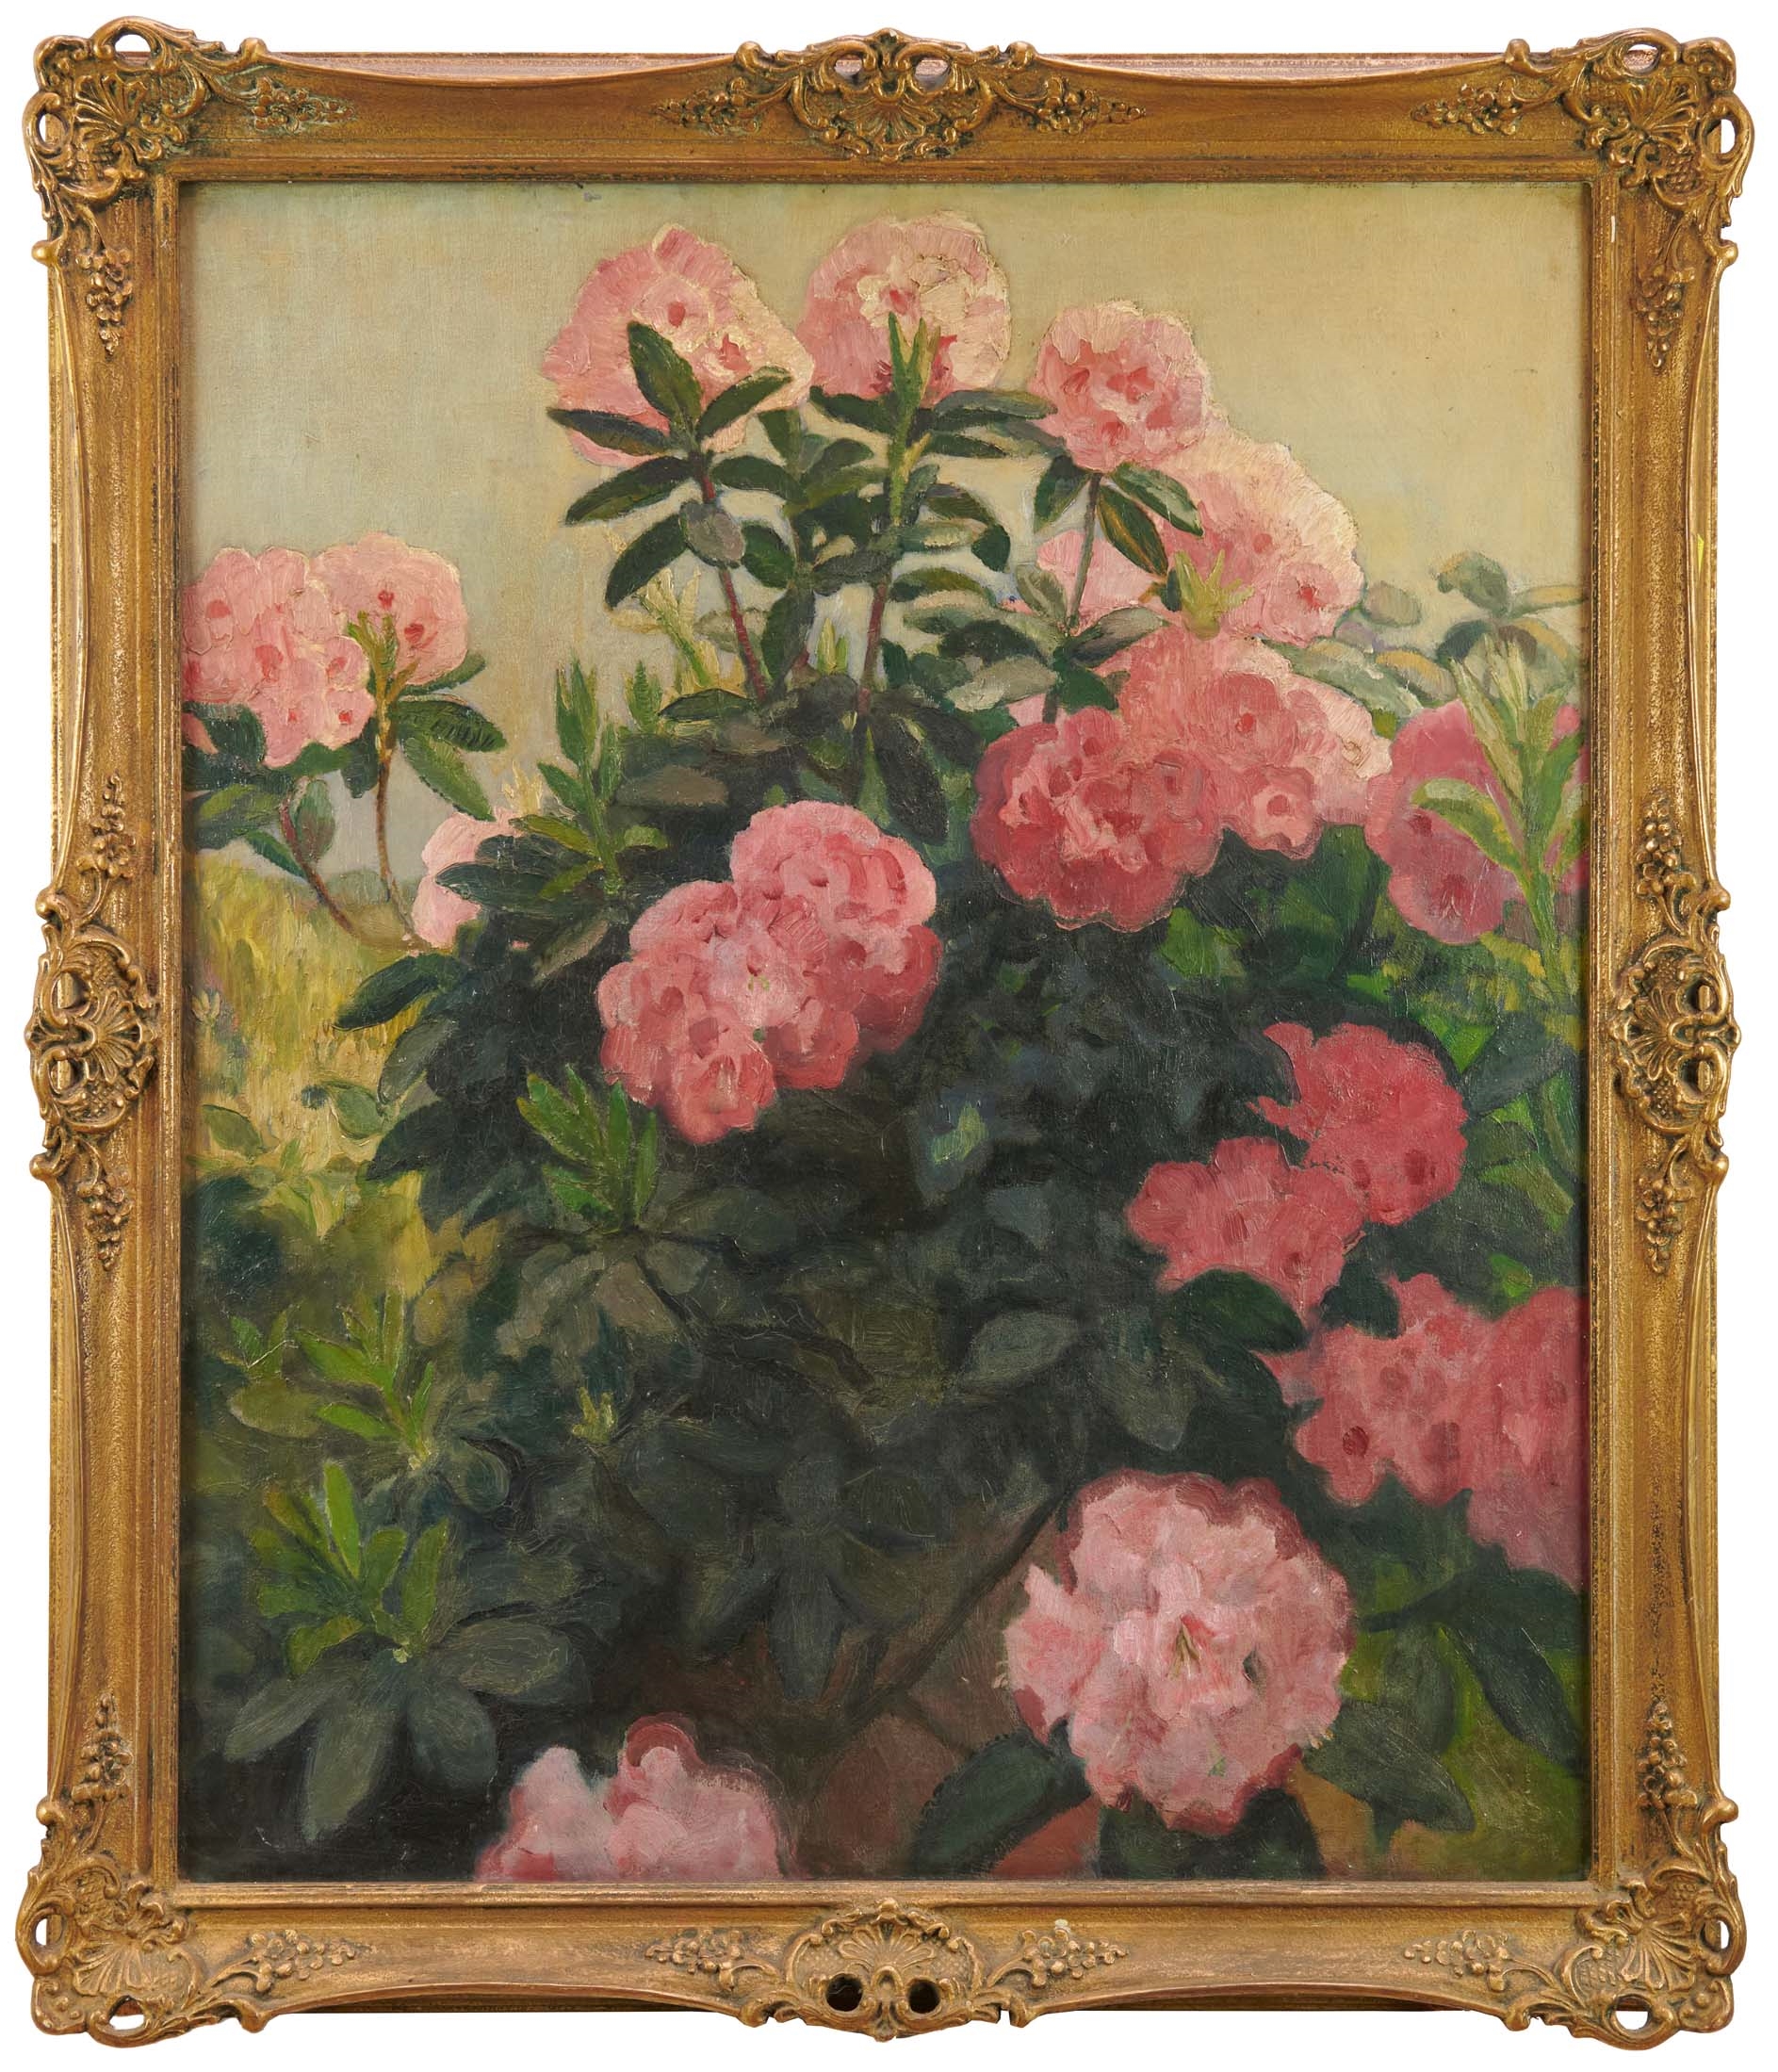 Artwork by Gerald Spencer Pryse, Rhododendron, Made of Oil on canvas